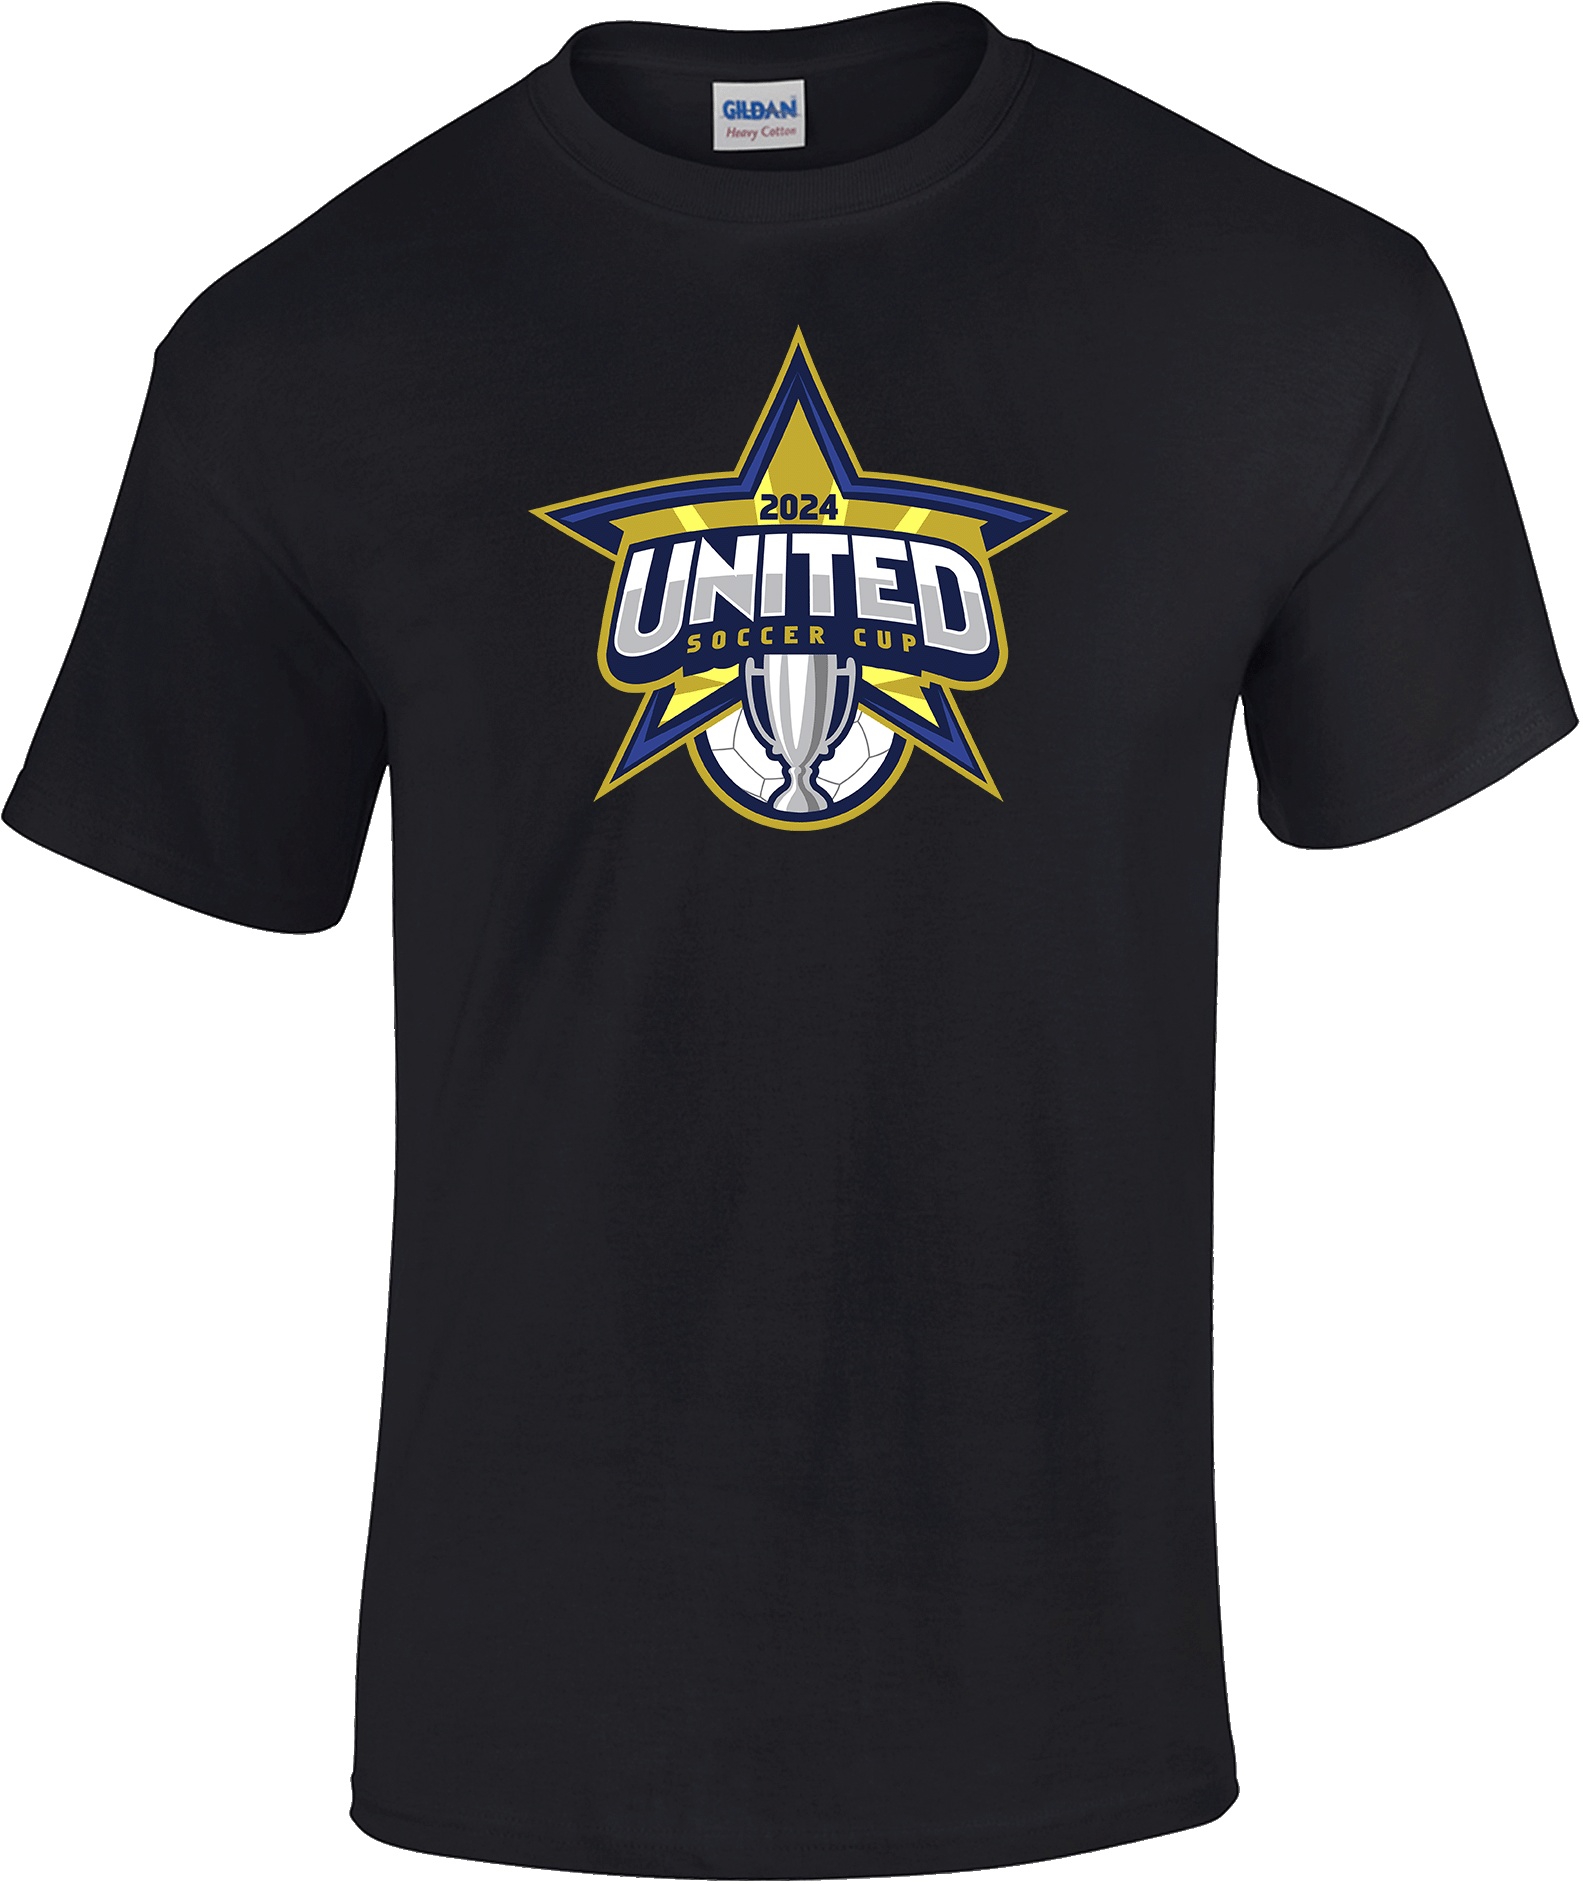 Short Sleeves - 2024 United Soccer Cup